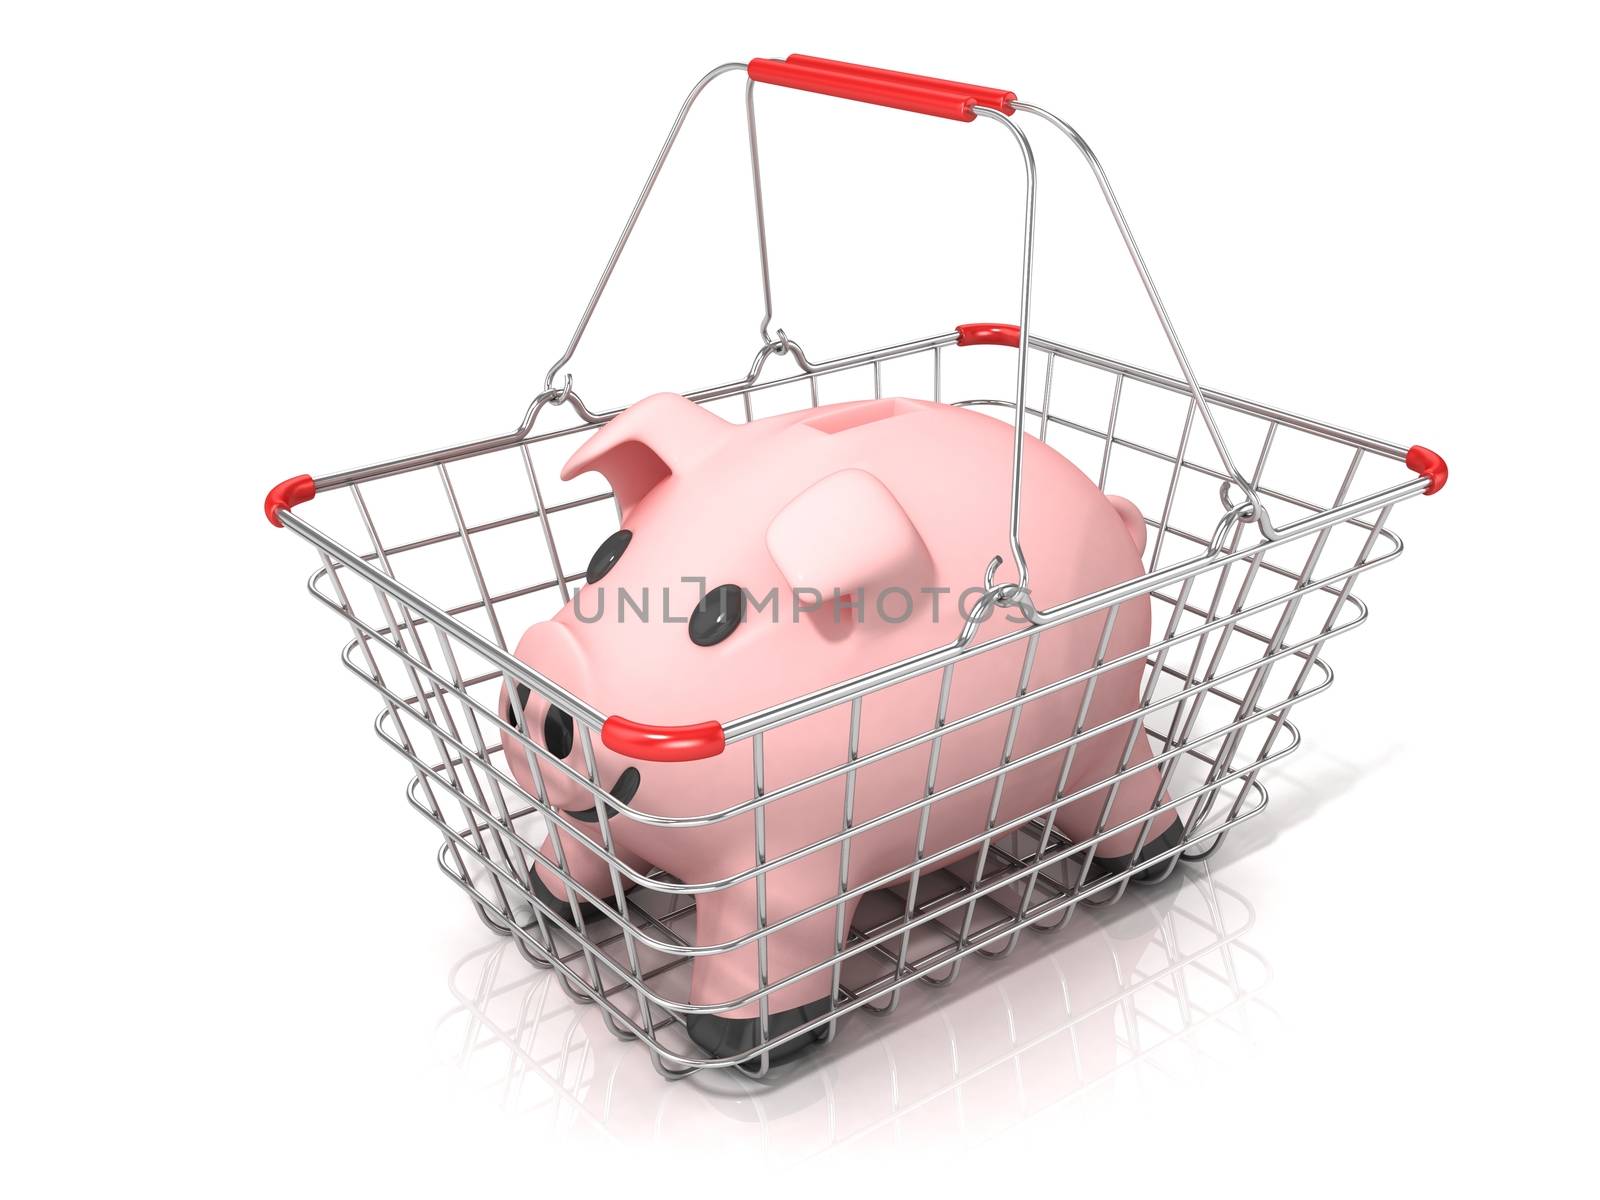 Piggy bank money box standing in steel wire shopping basket by djmilic